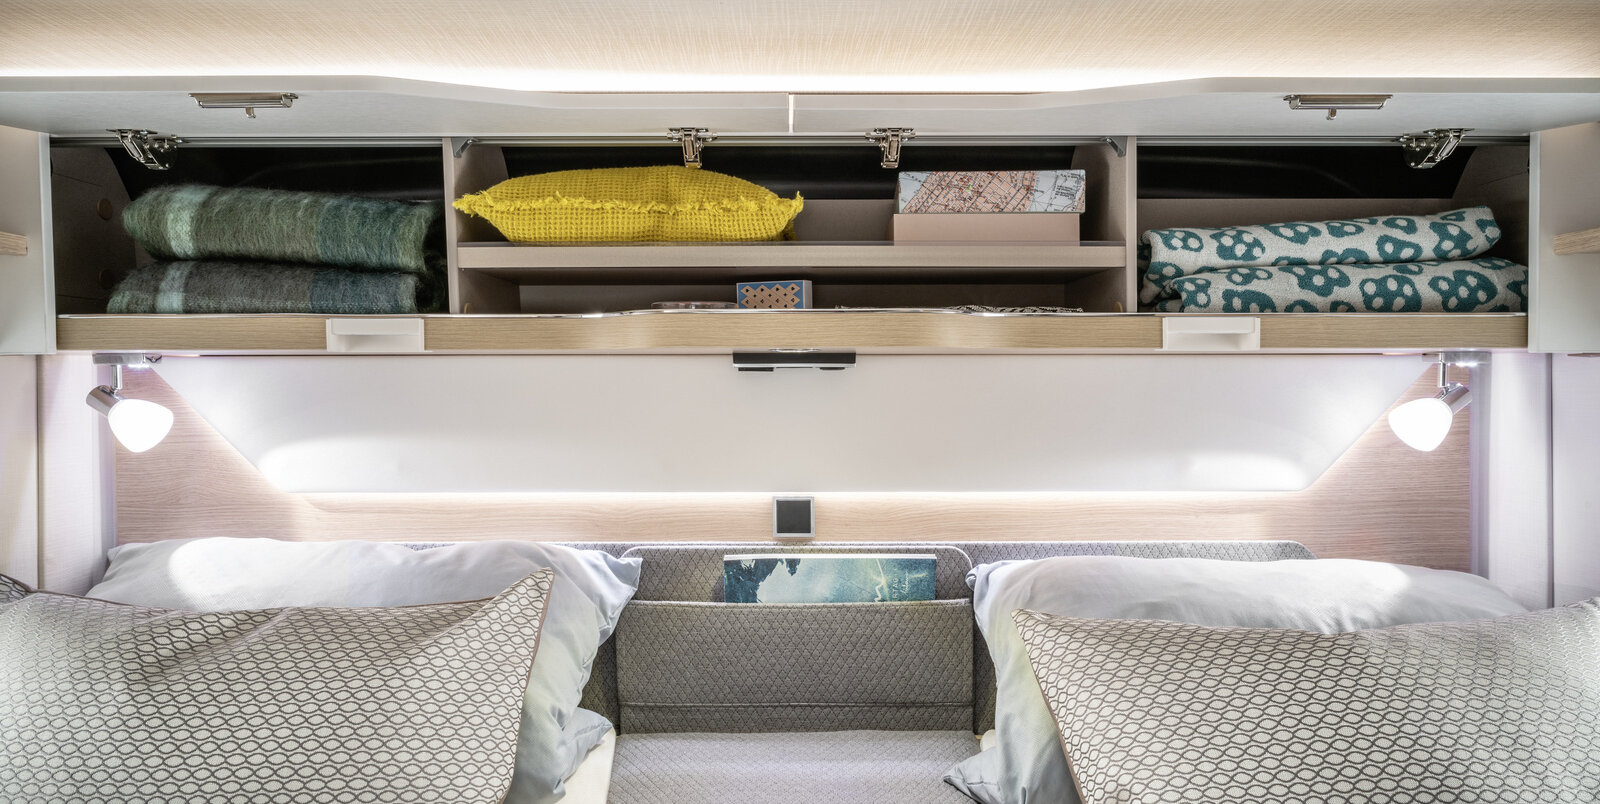 Open overhead storage cupboards filled with blankets above the bed in the rear, lighting, utensil bag and pillows in the Hymer B MC